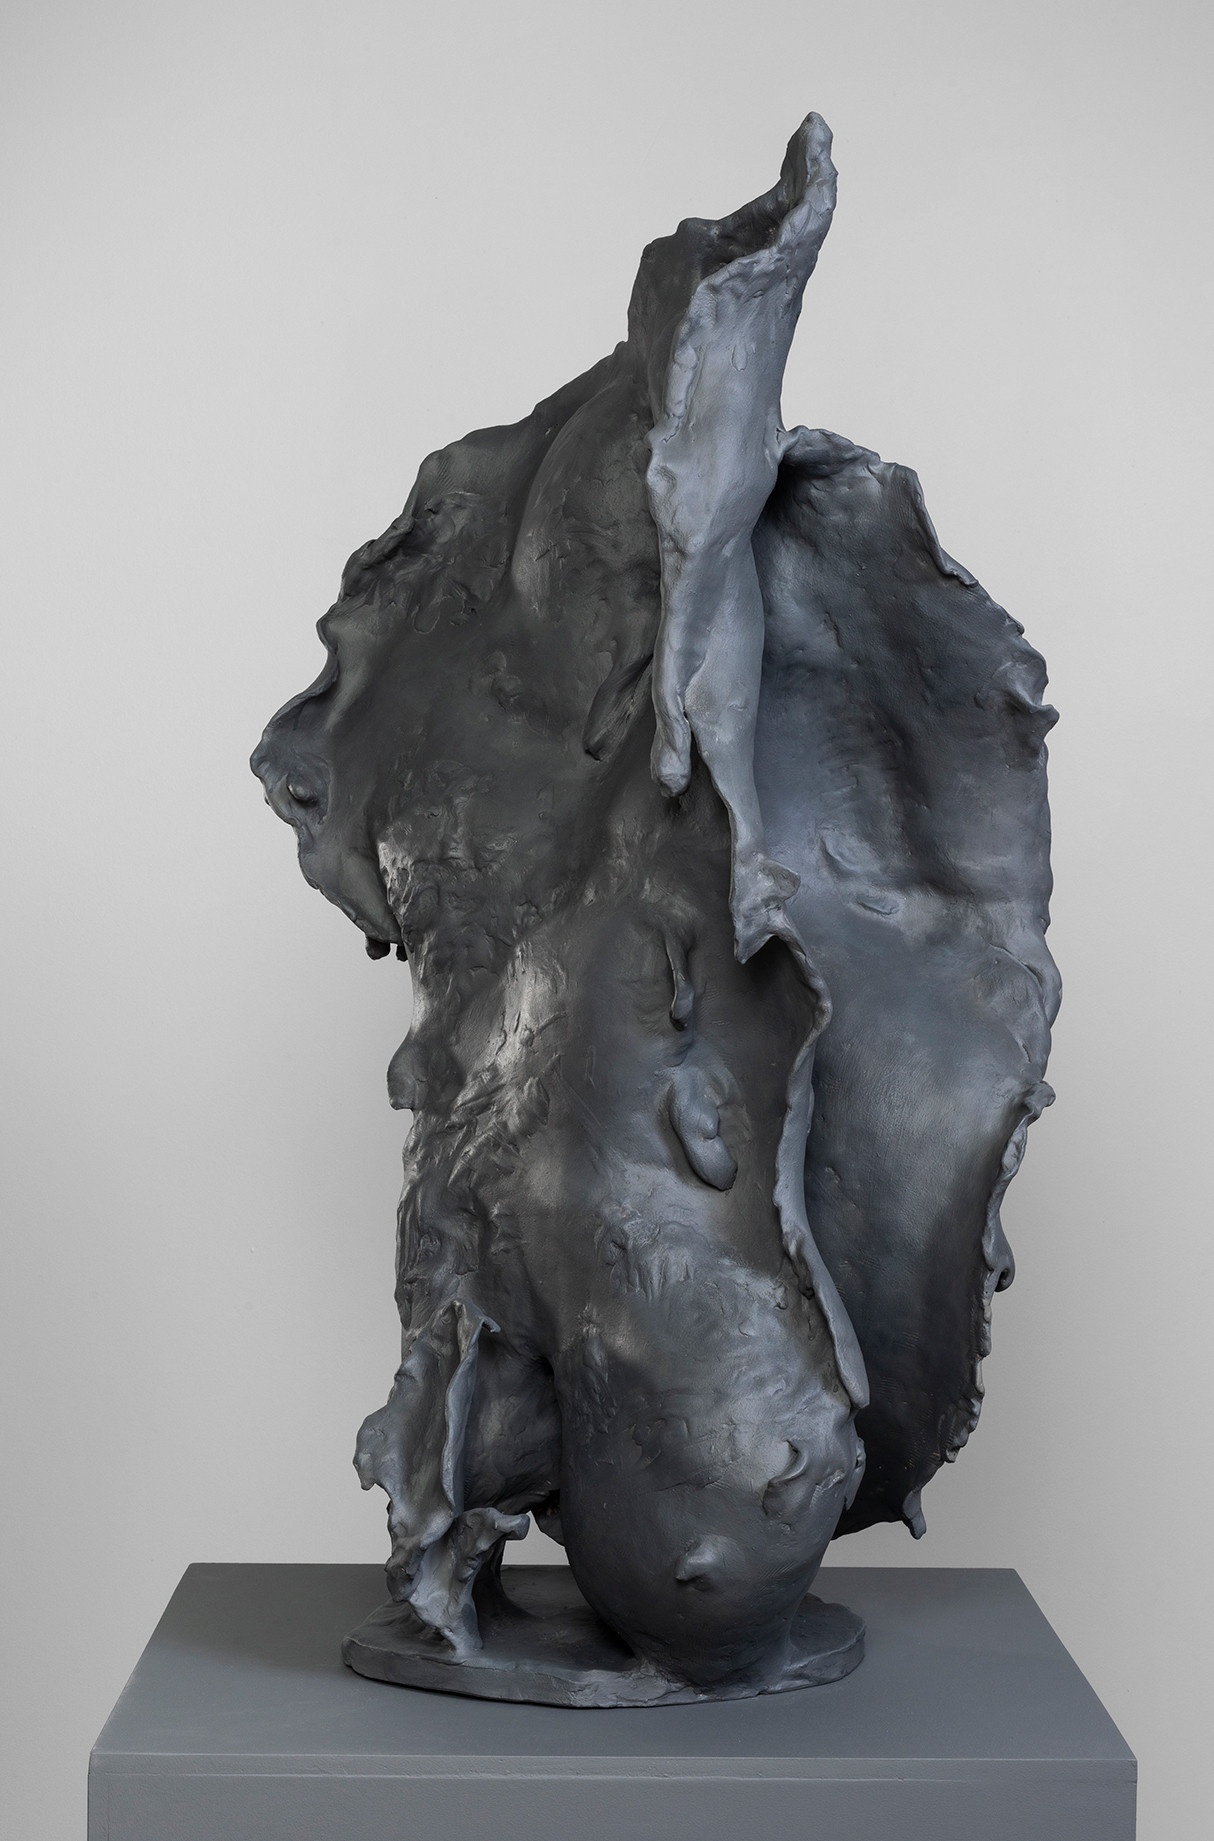 Ceramic sculpture, painted dark gray, with an uneven surface.